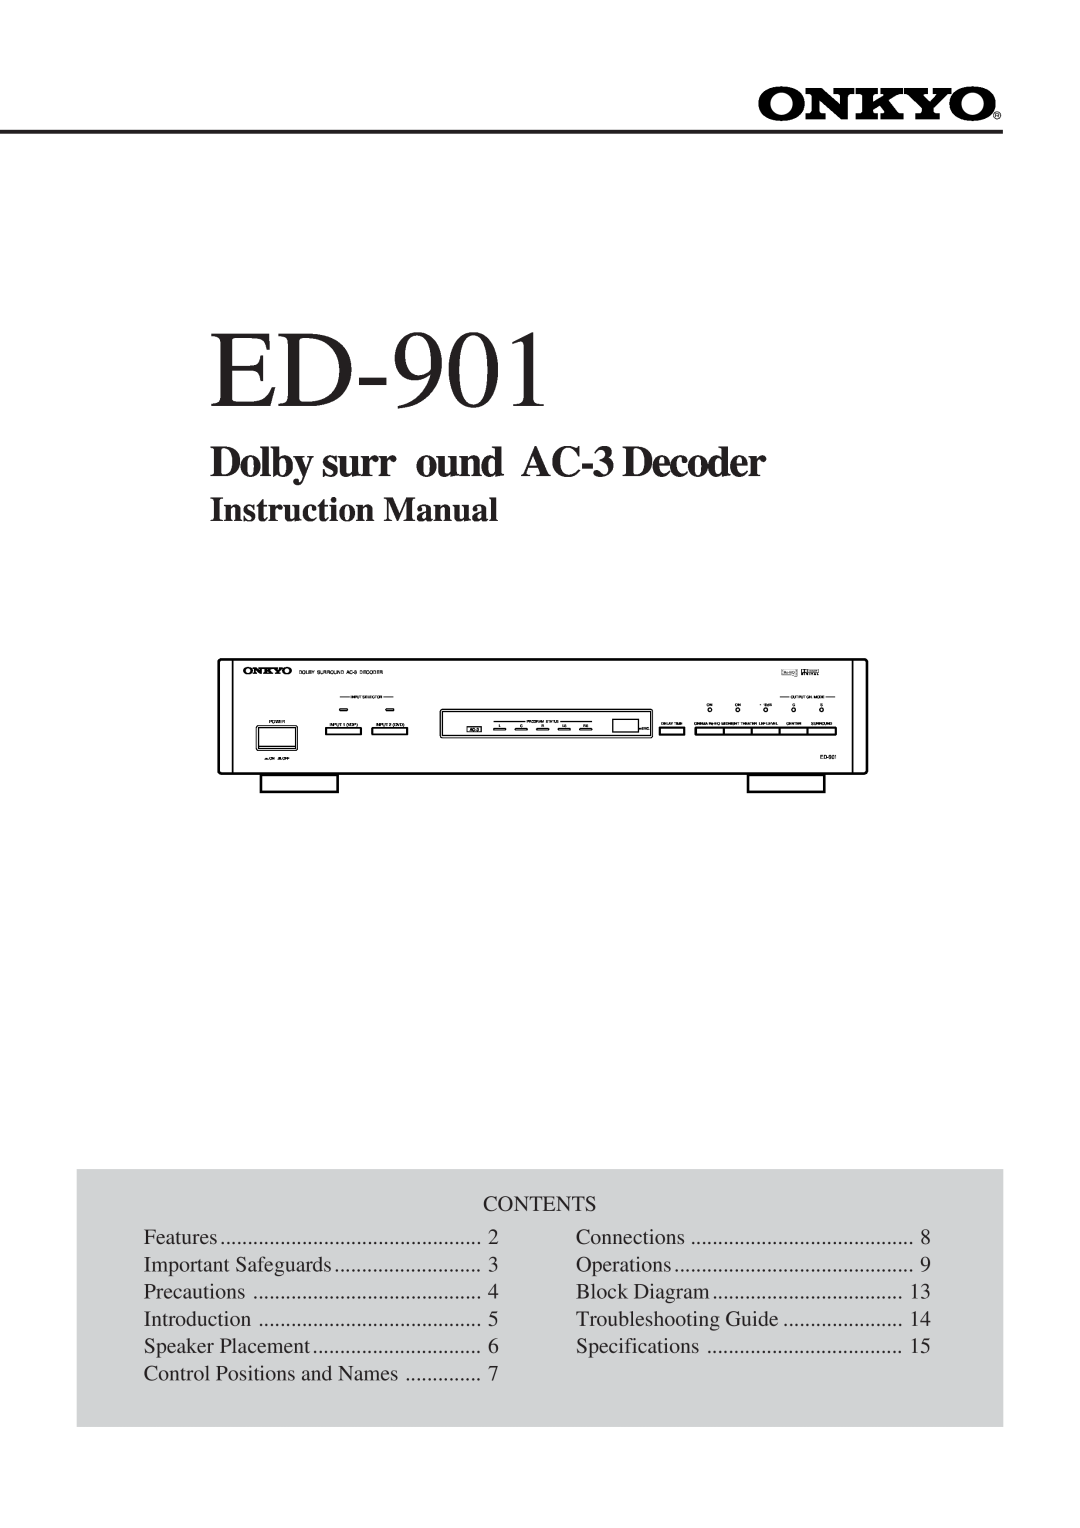 Onkyo ED-901 instruction manual Dolby surr ound AC-3Decoder 